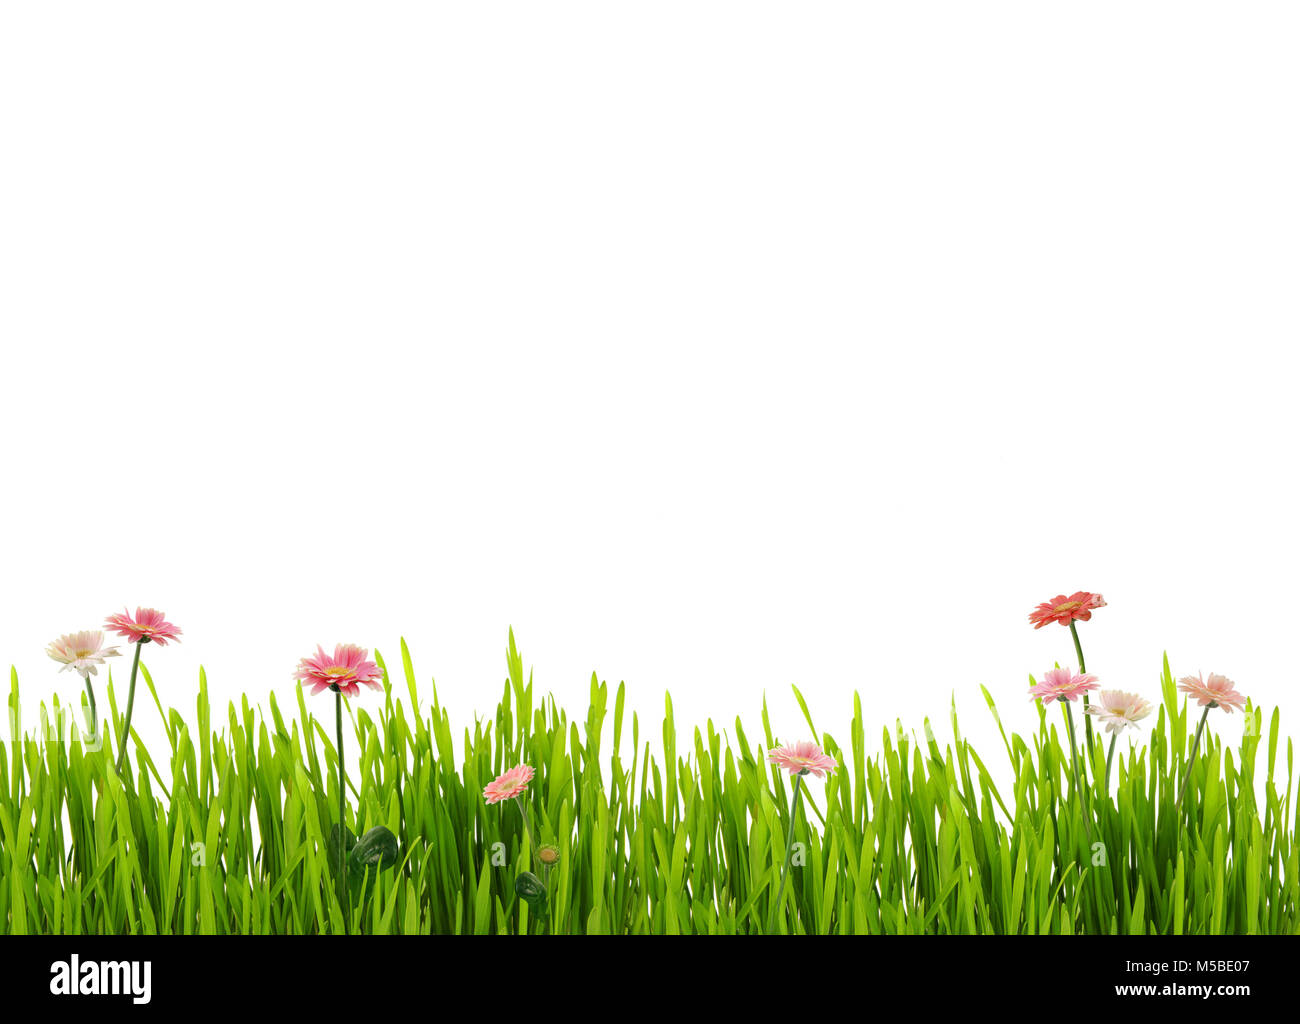 Fresh spring grass and daisies, isolated on white background Stock Photo